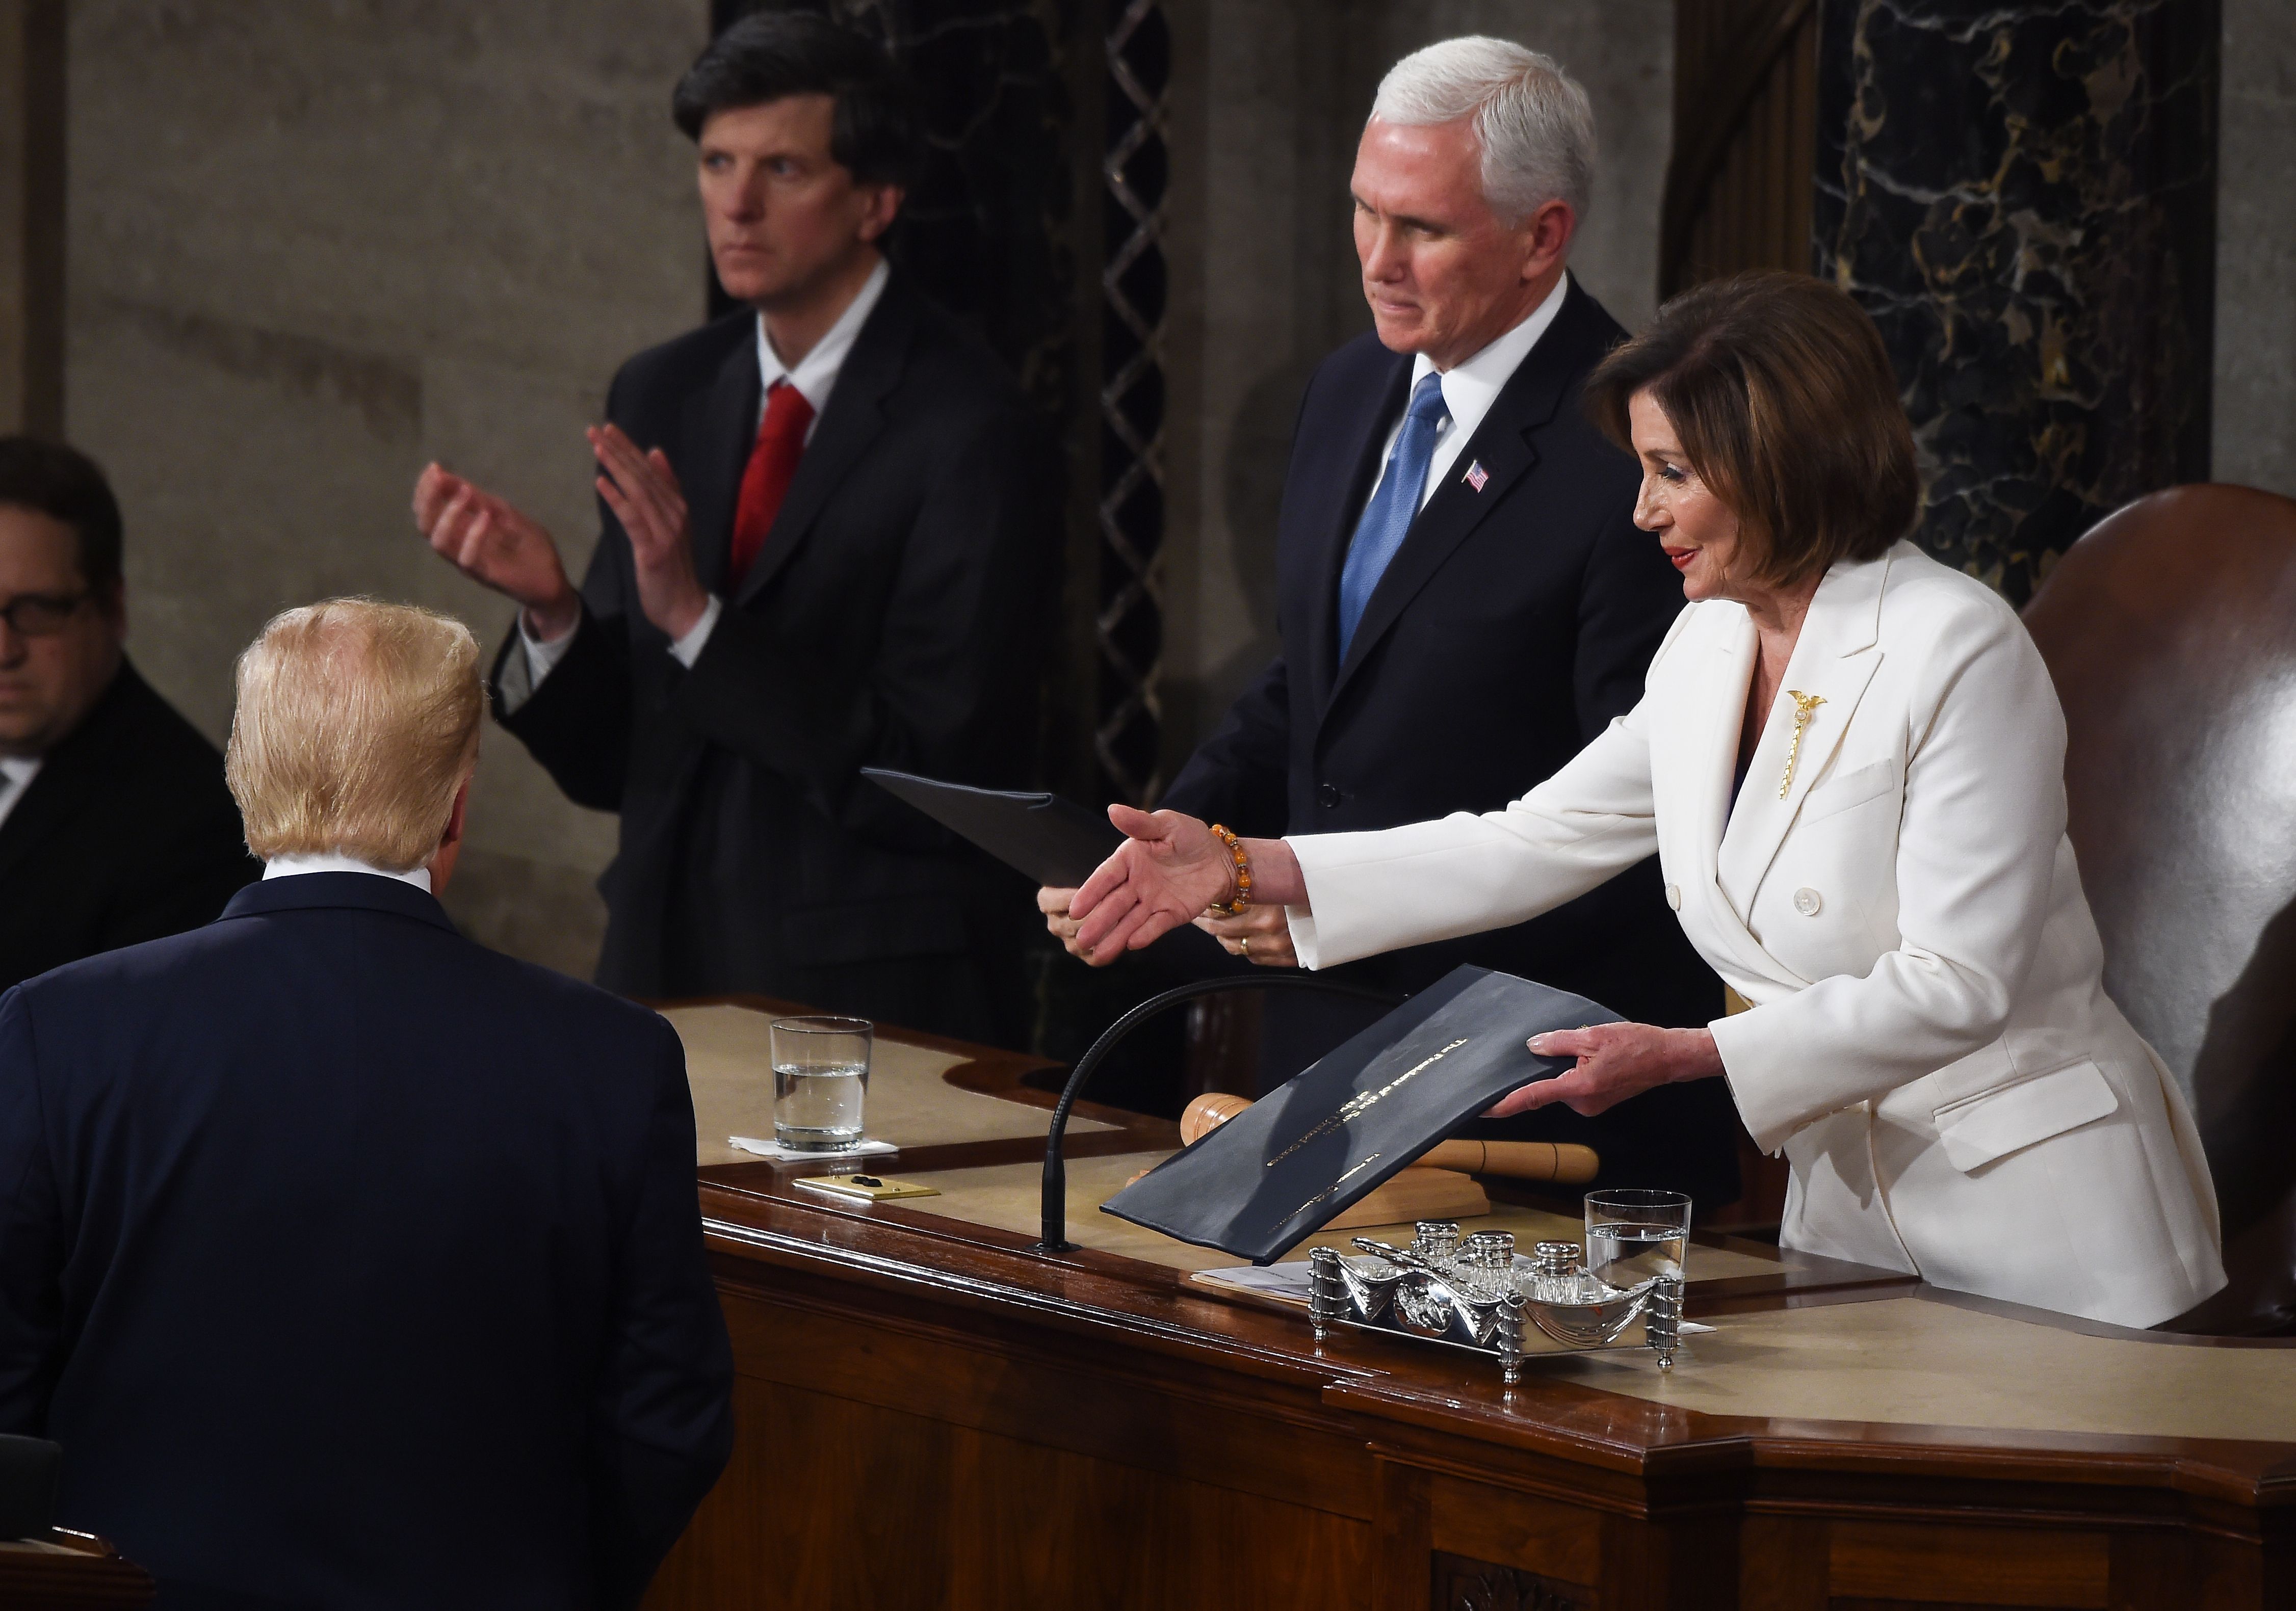 Speaker of the US House of Representatives Nancy Pelosi extends a hand to US president Donald Trump ahead of the State of the Union address 